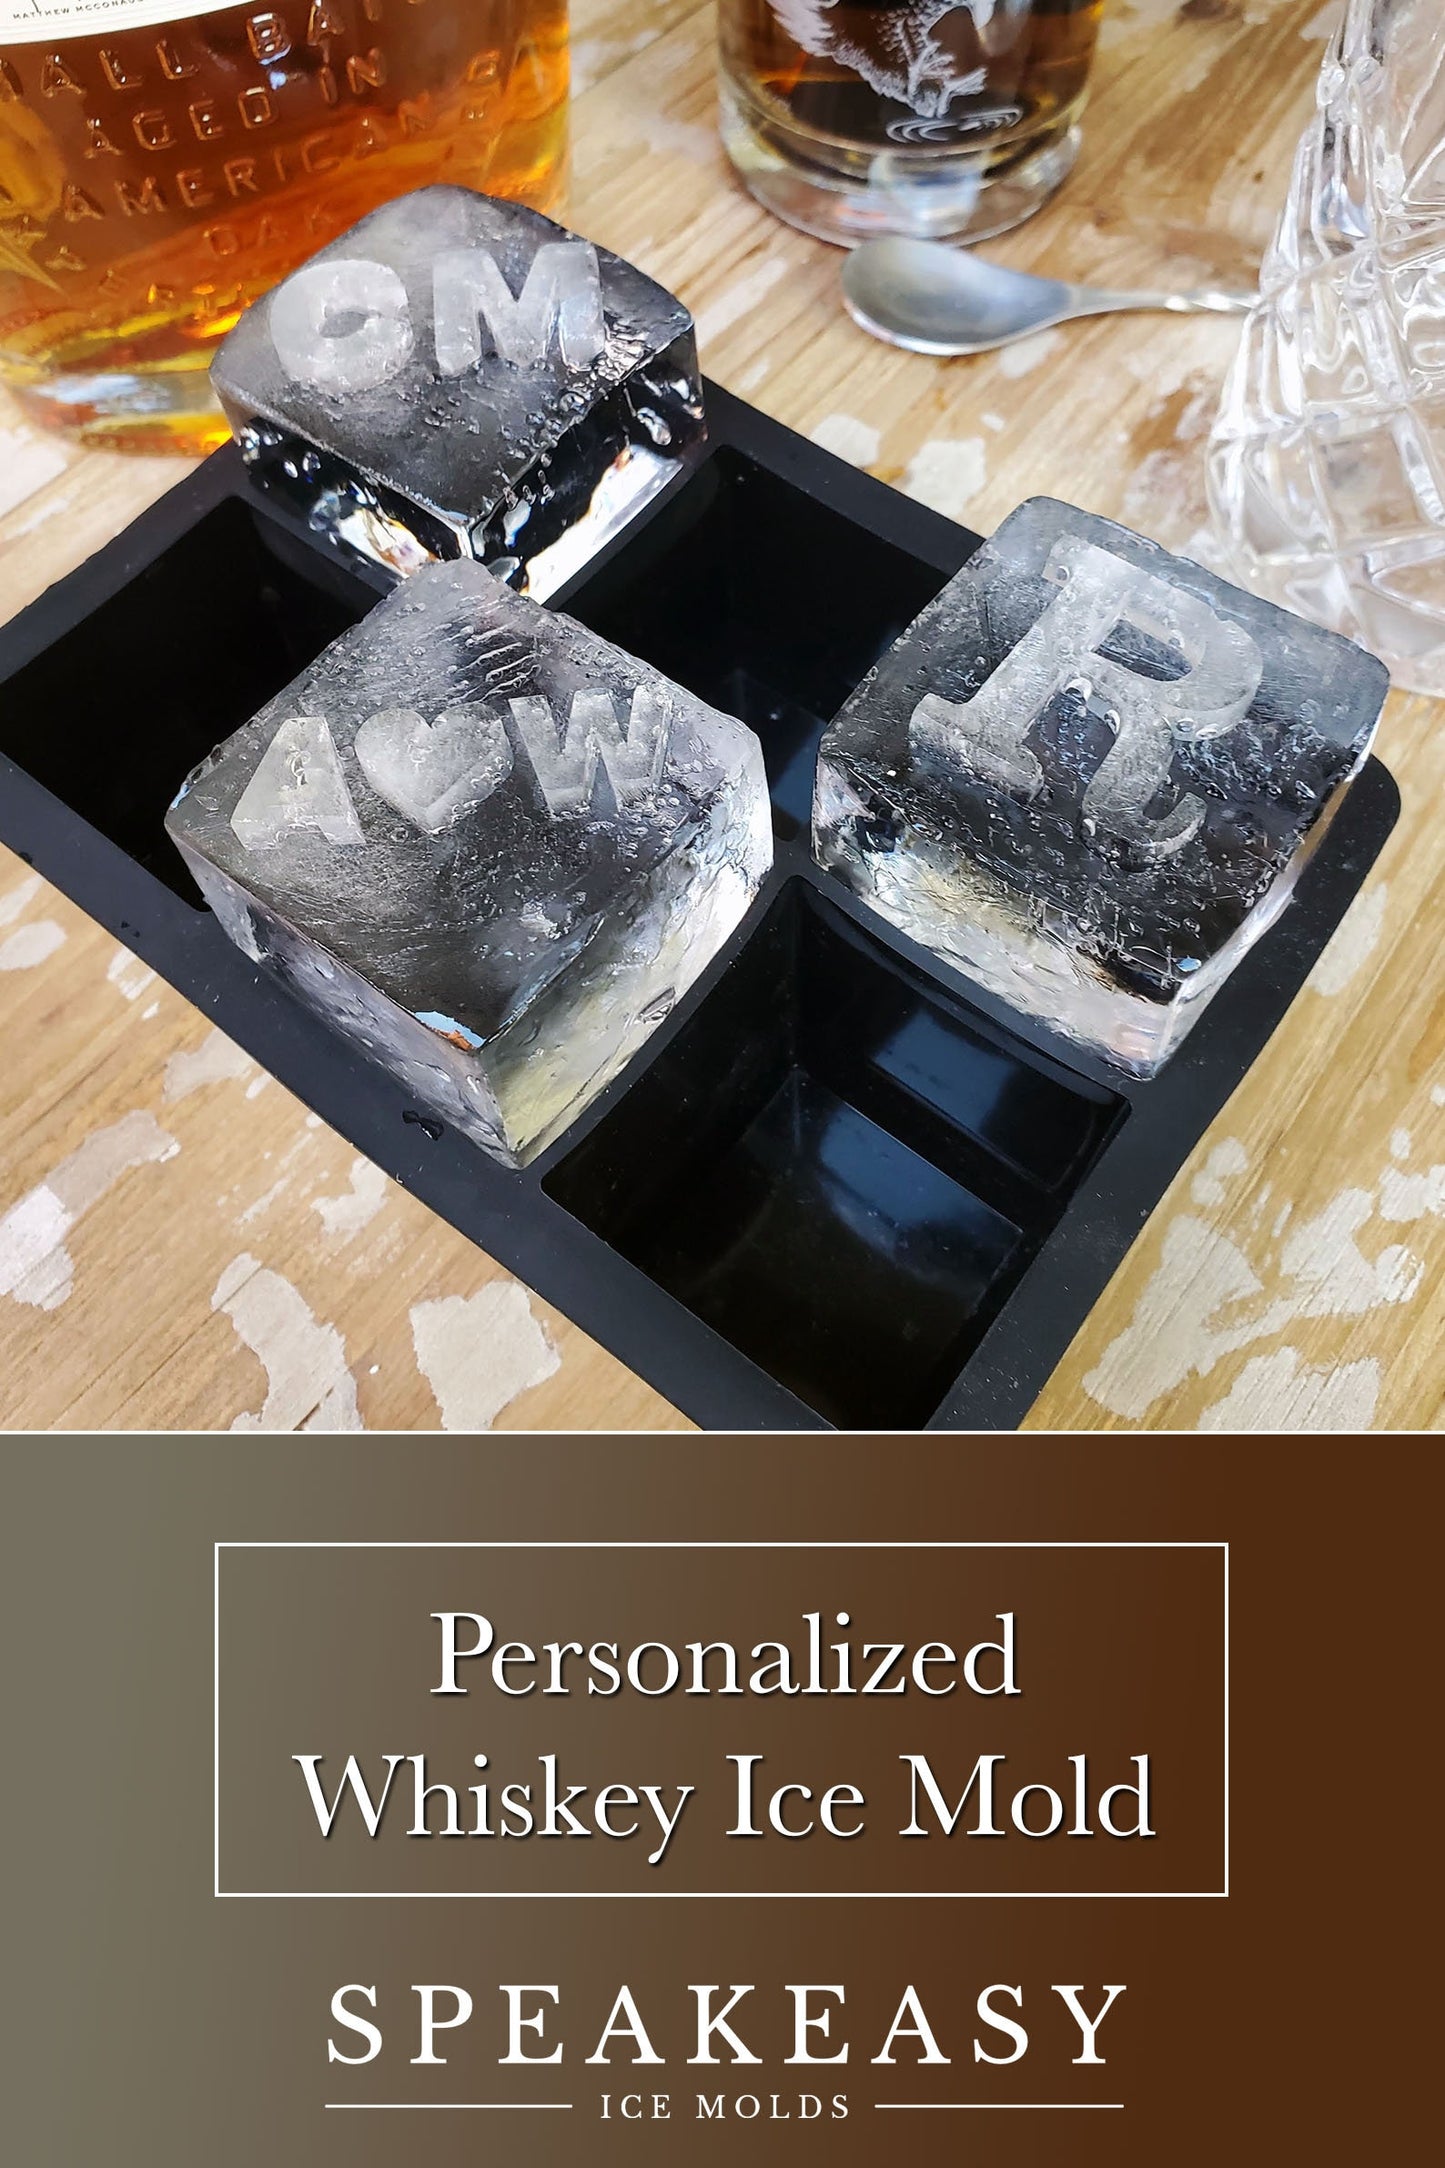 Whiskey Gift idea for Dad, Groom, Boss | Personalized silicone ice mold for engagement gift, Custom whiskey ice cubes, Groomsmen gift idea